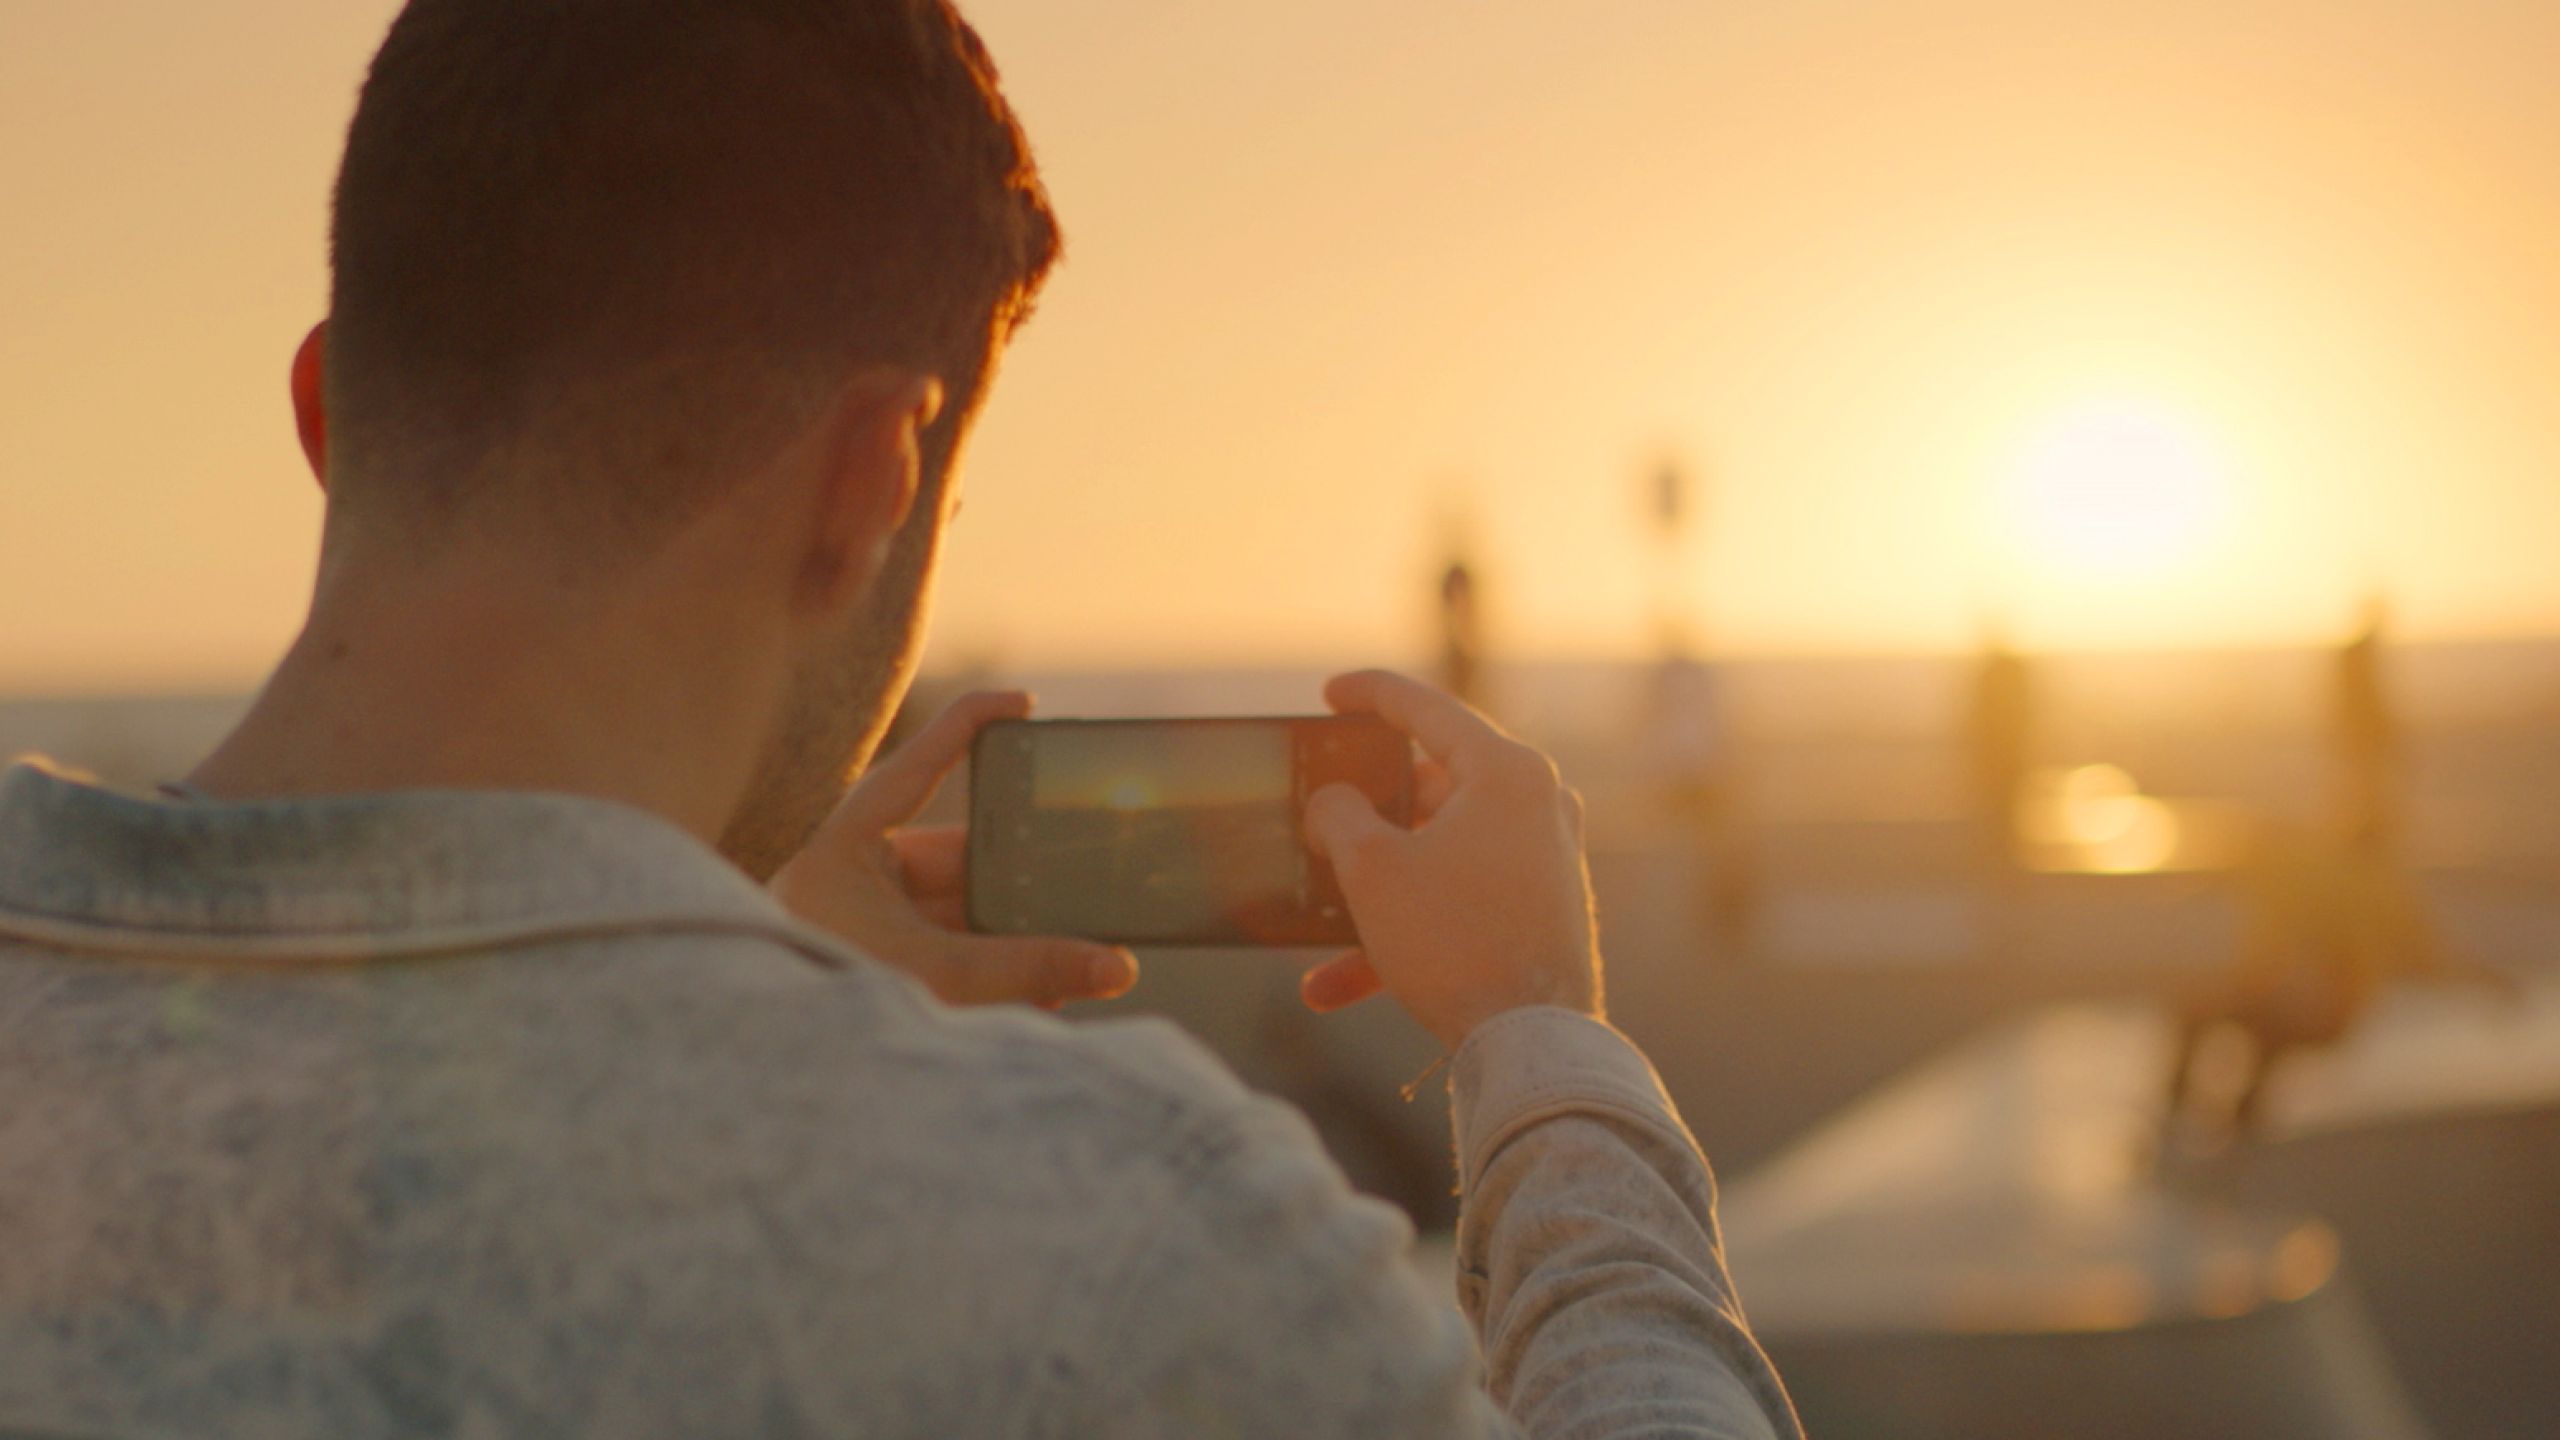 A person taking a photo of a sunset using their mobile phone